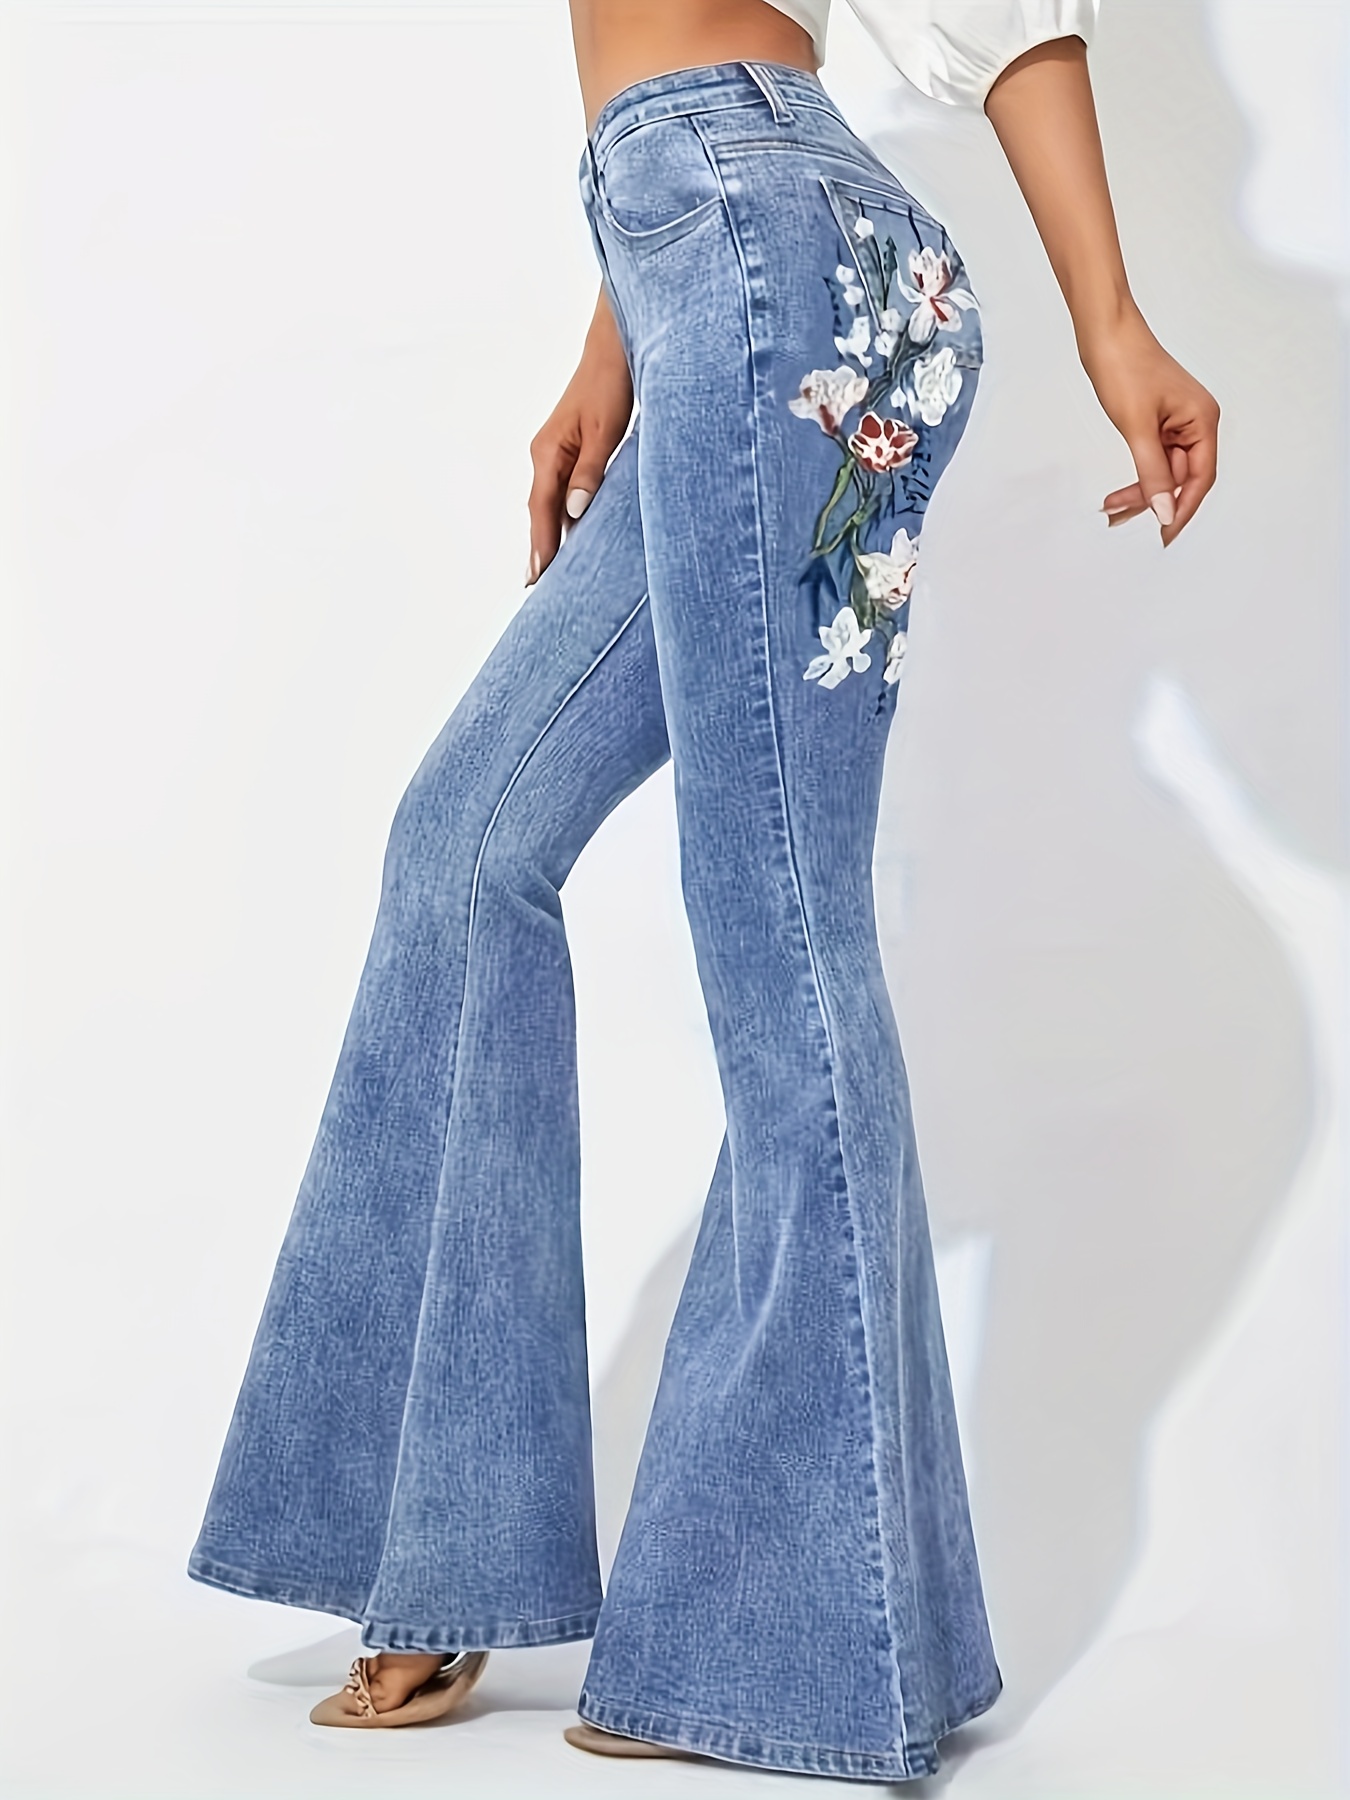 Floral Embroidered Decor Flare Jeans, Slant Pockets High Stretch Bell  Bottom Jeans, Women's Denim Jeans & Clothing